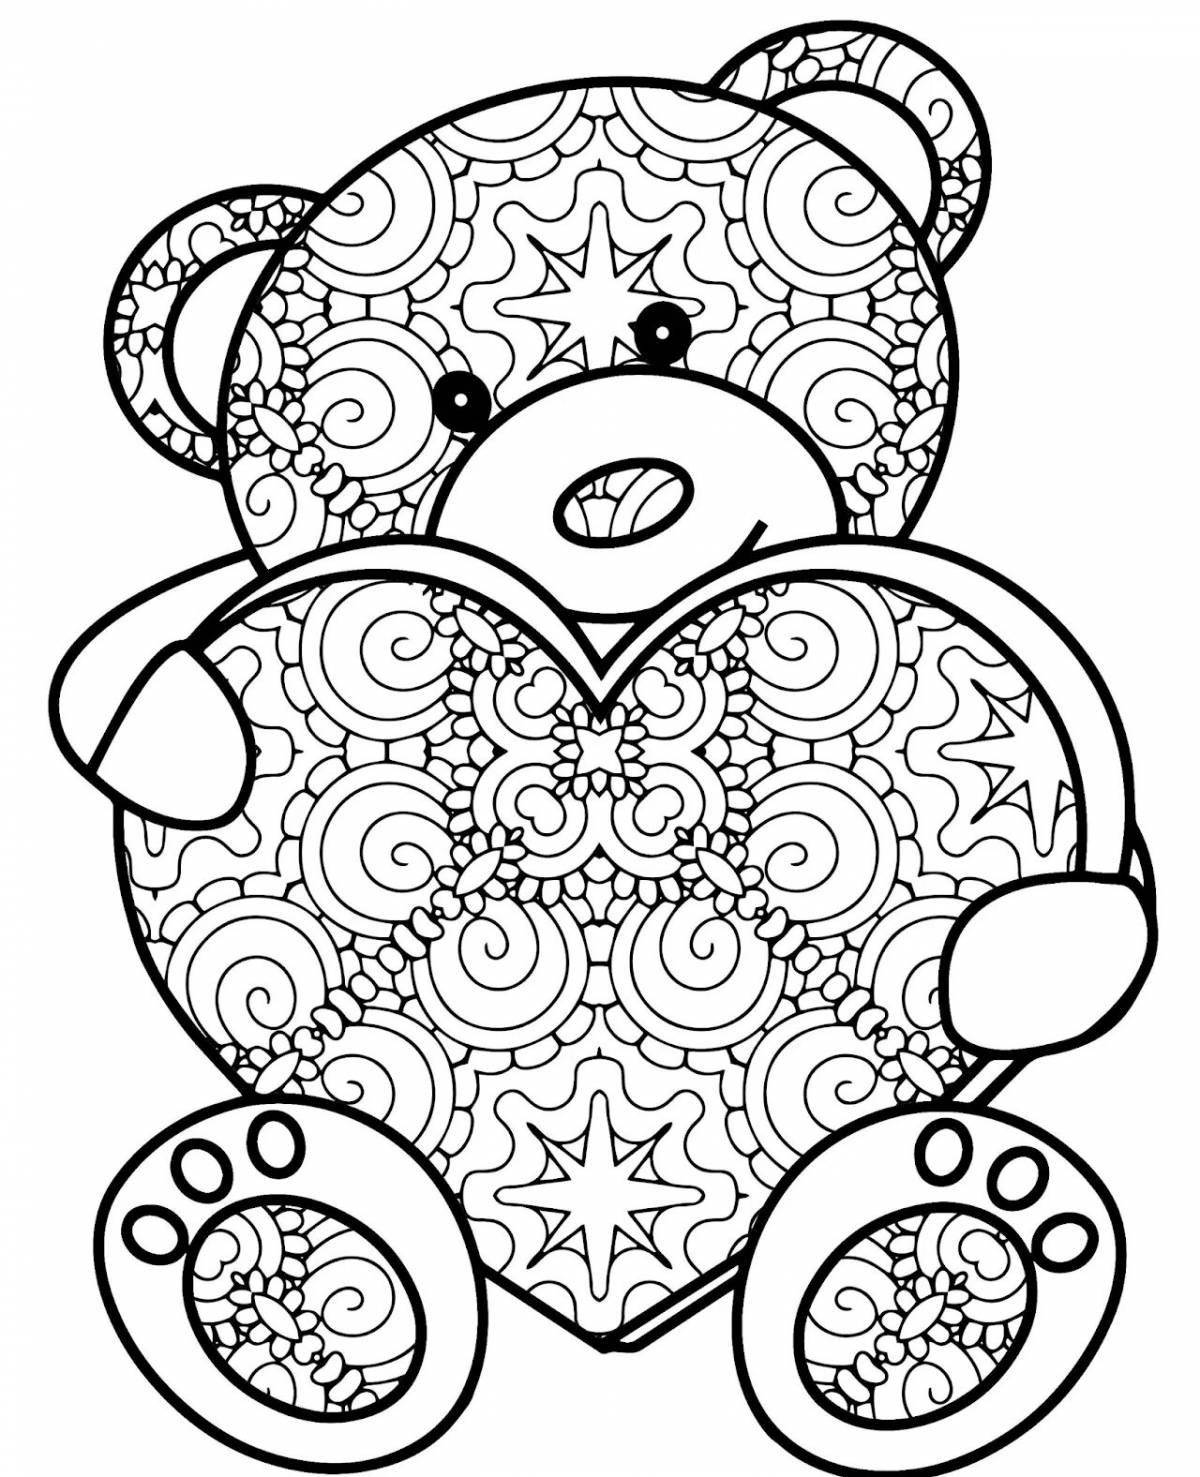 Violent anti-stress easy coloring pages for girls